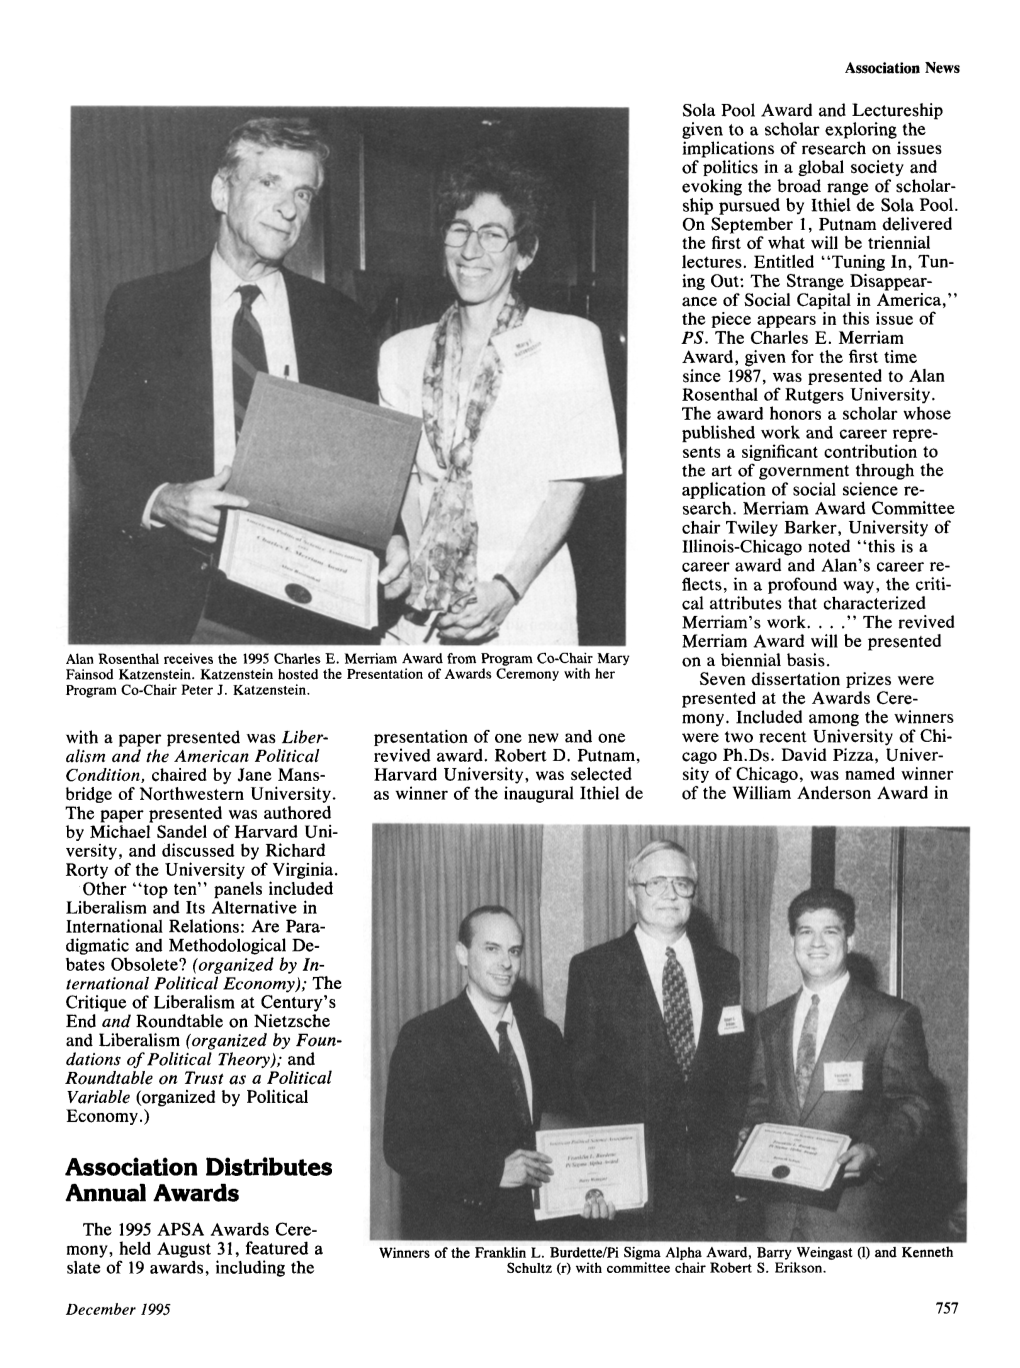 Association Distributes Annual Awards the 1995 APSA Awards Cere- Mony, Held August 31, Featured a Winners of the Franklin L